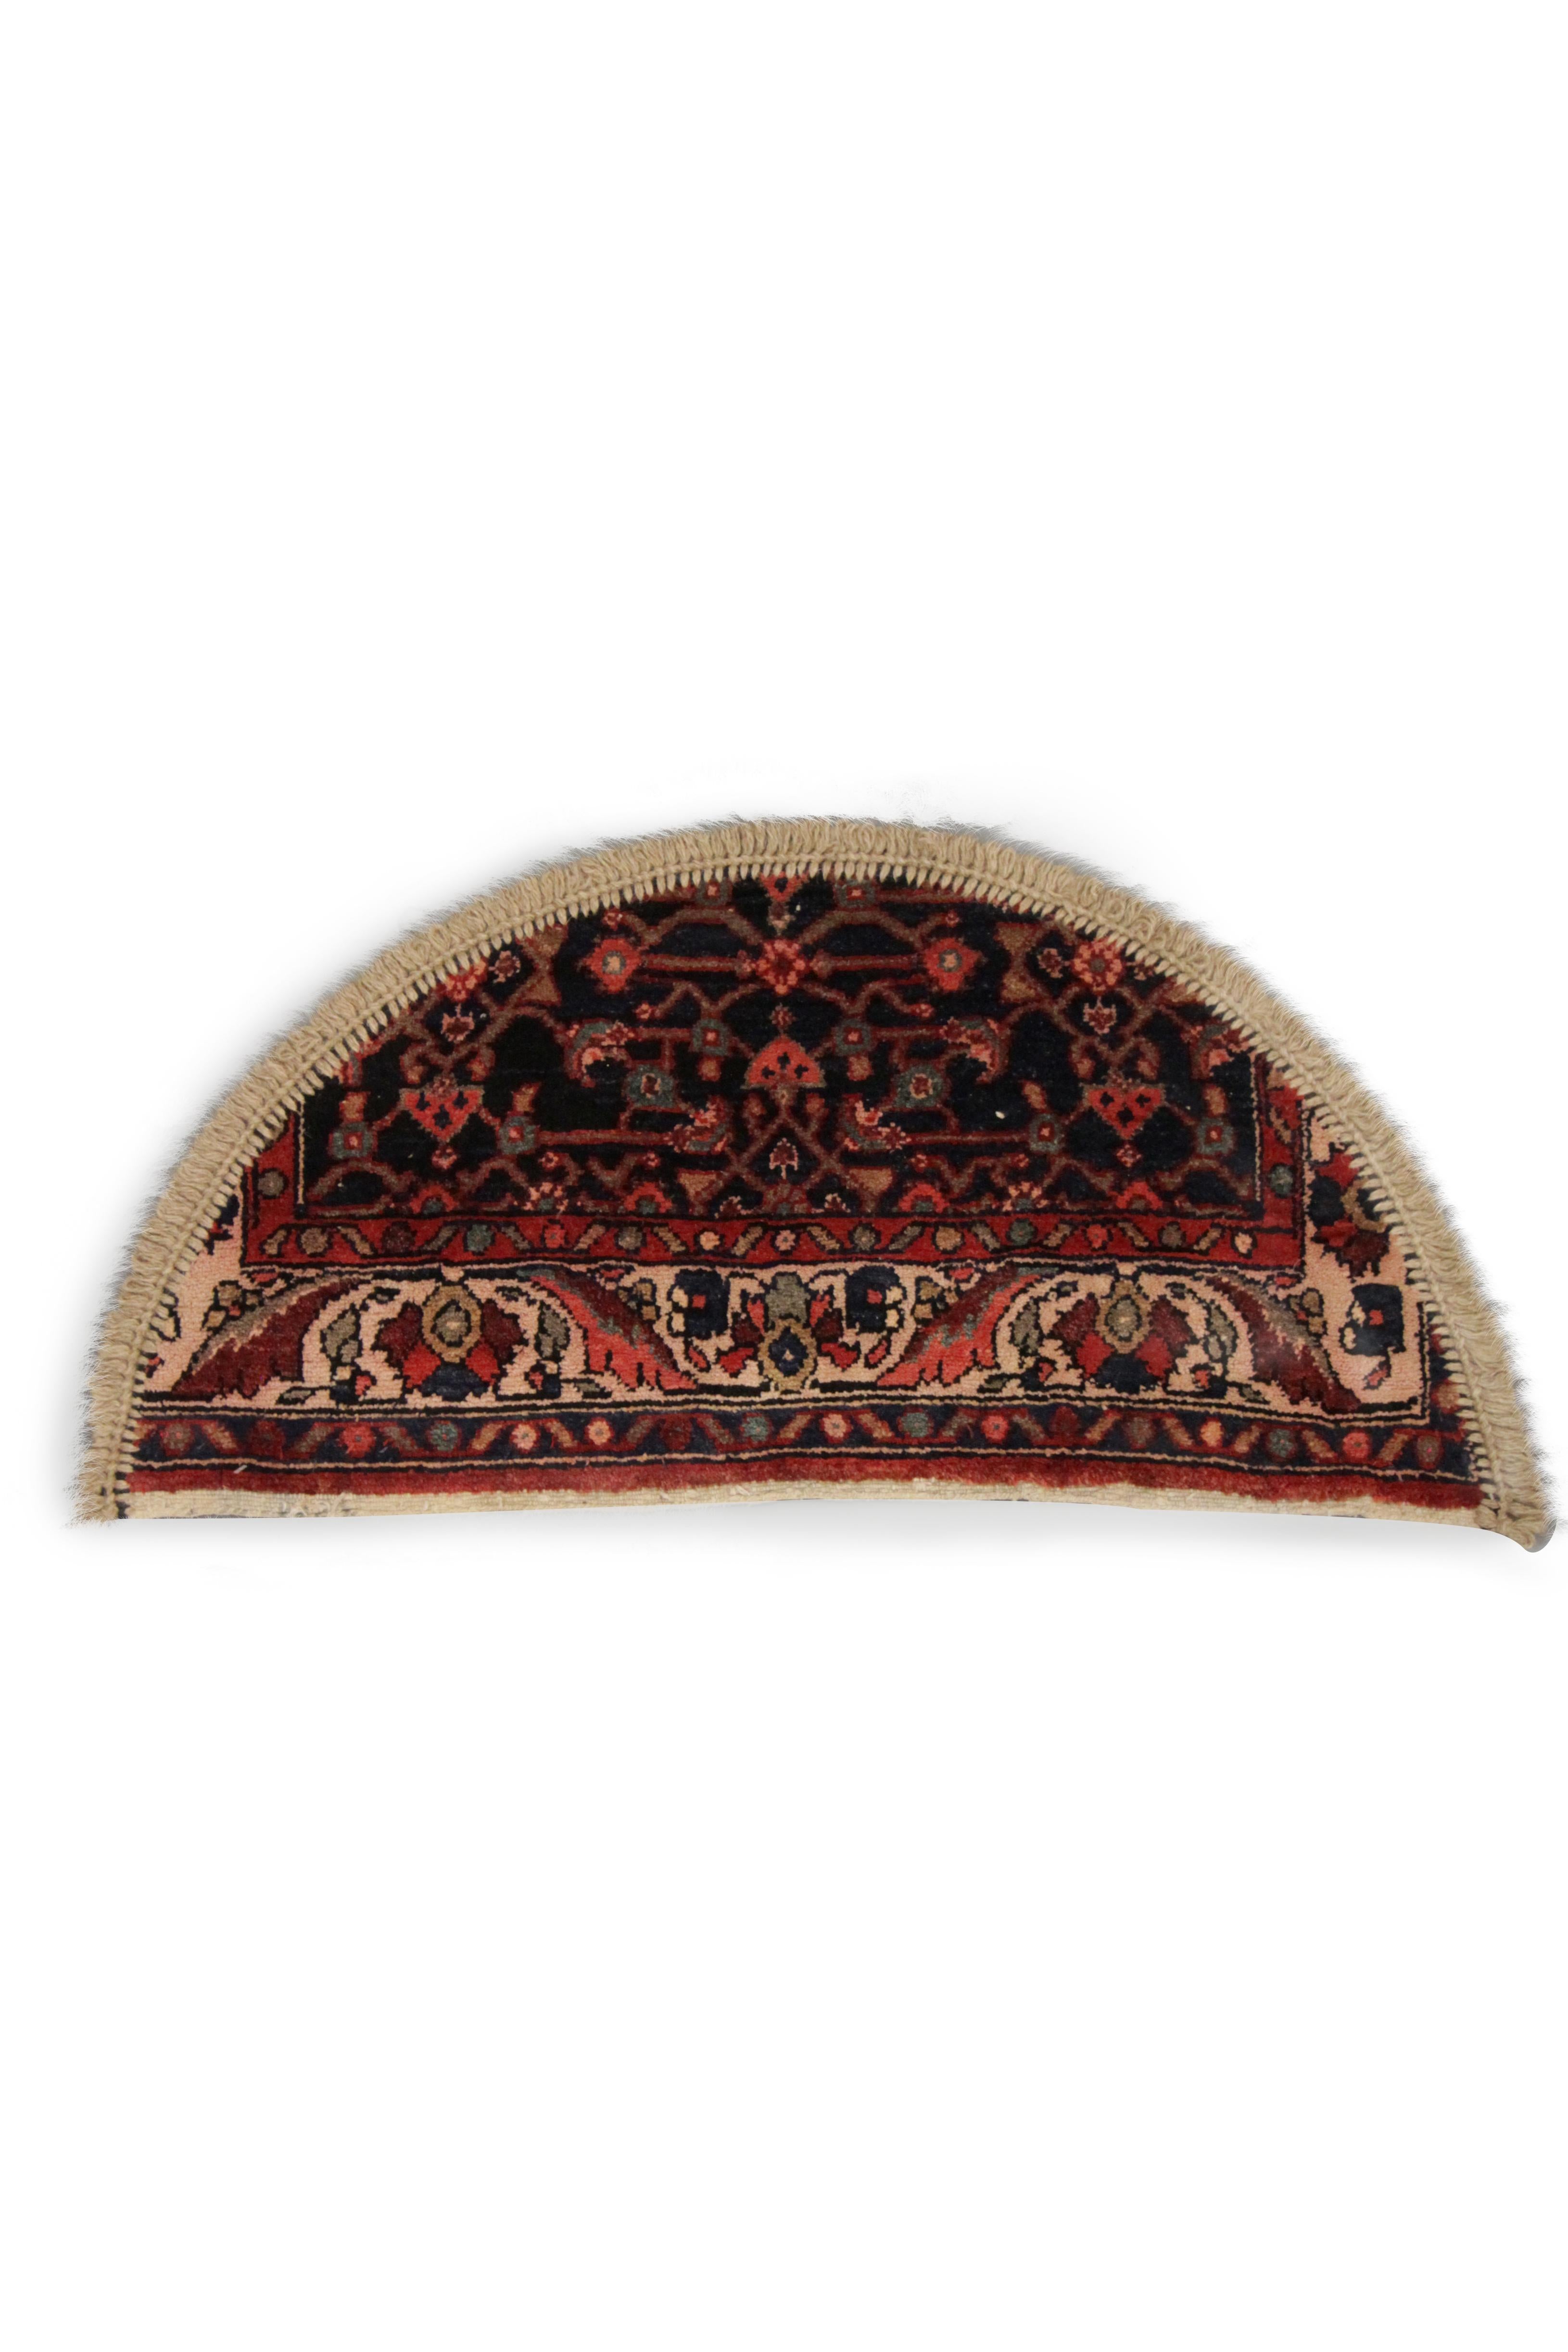 This handmade carpet layered design mixes floral and geometric motifs in various sombre colors, scrolling horizontally across this little area rug, perfect for use as a bedside rug or interior front doormat. This semicircle entranceway doormat has